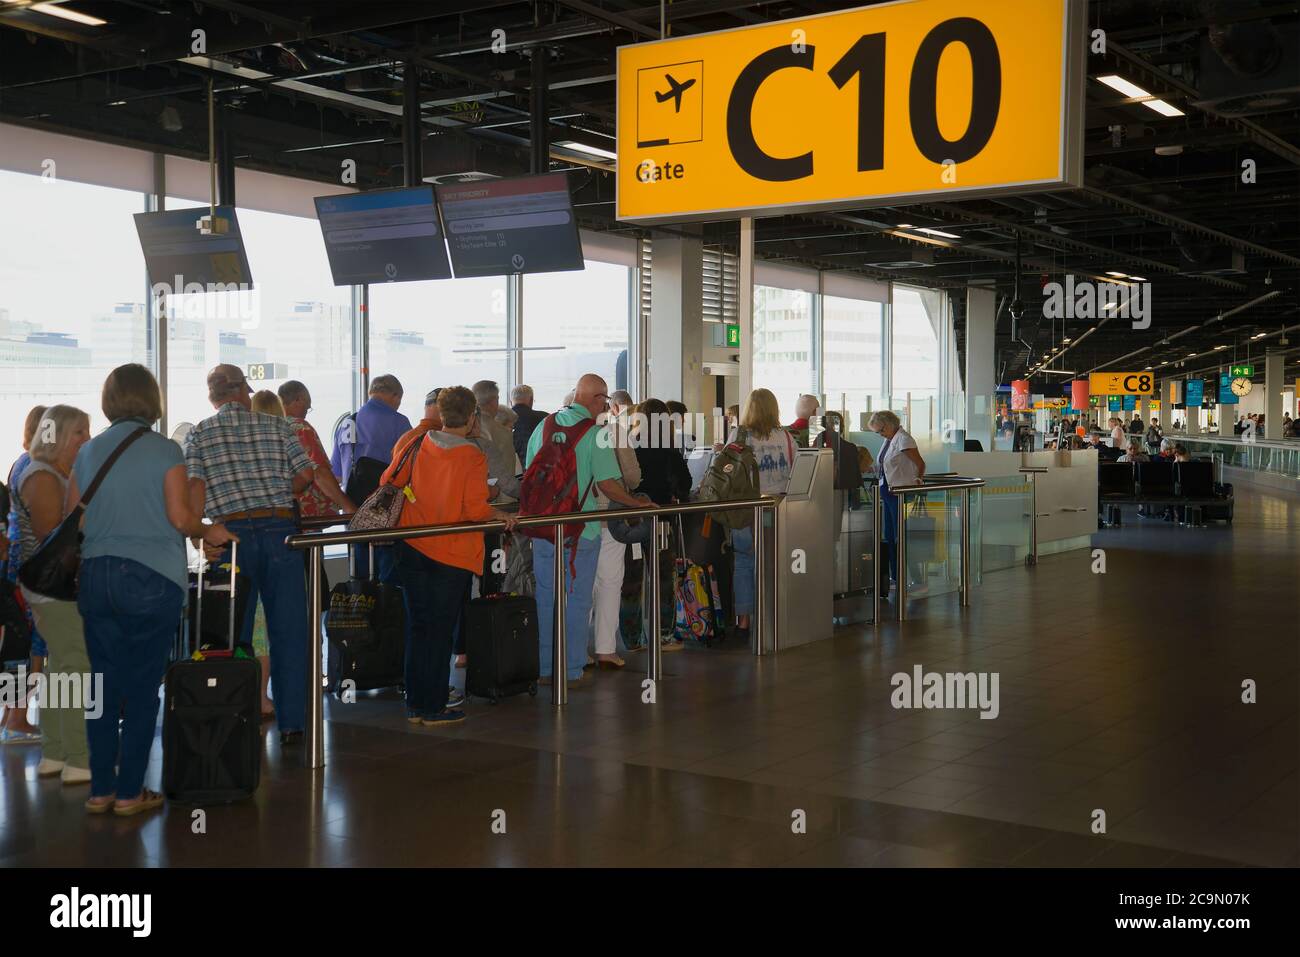 AMSTERDAM, NETHERLANDS - SEPTEMBER 17, 2017: Passengers are queuing for boarding a plane in the departure area on the Schiphol Airport Stock Photo